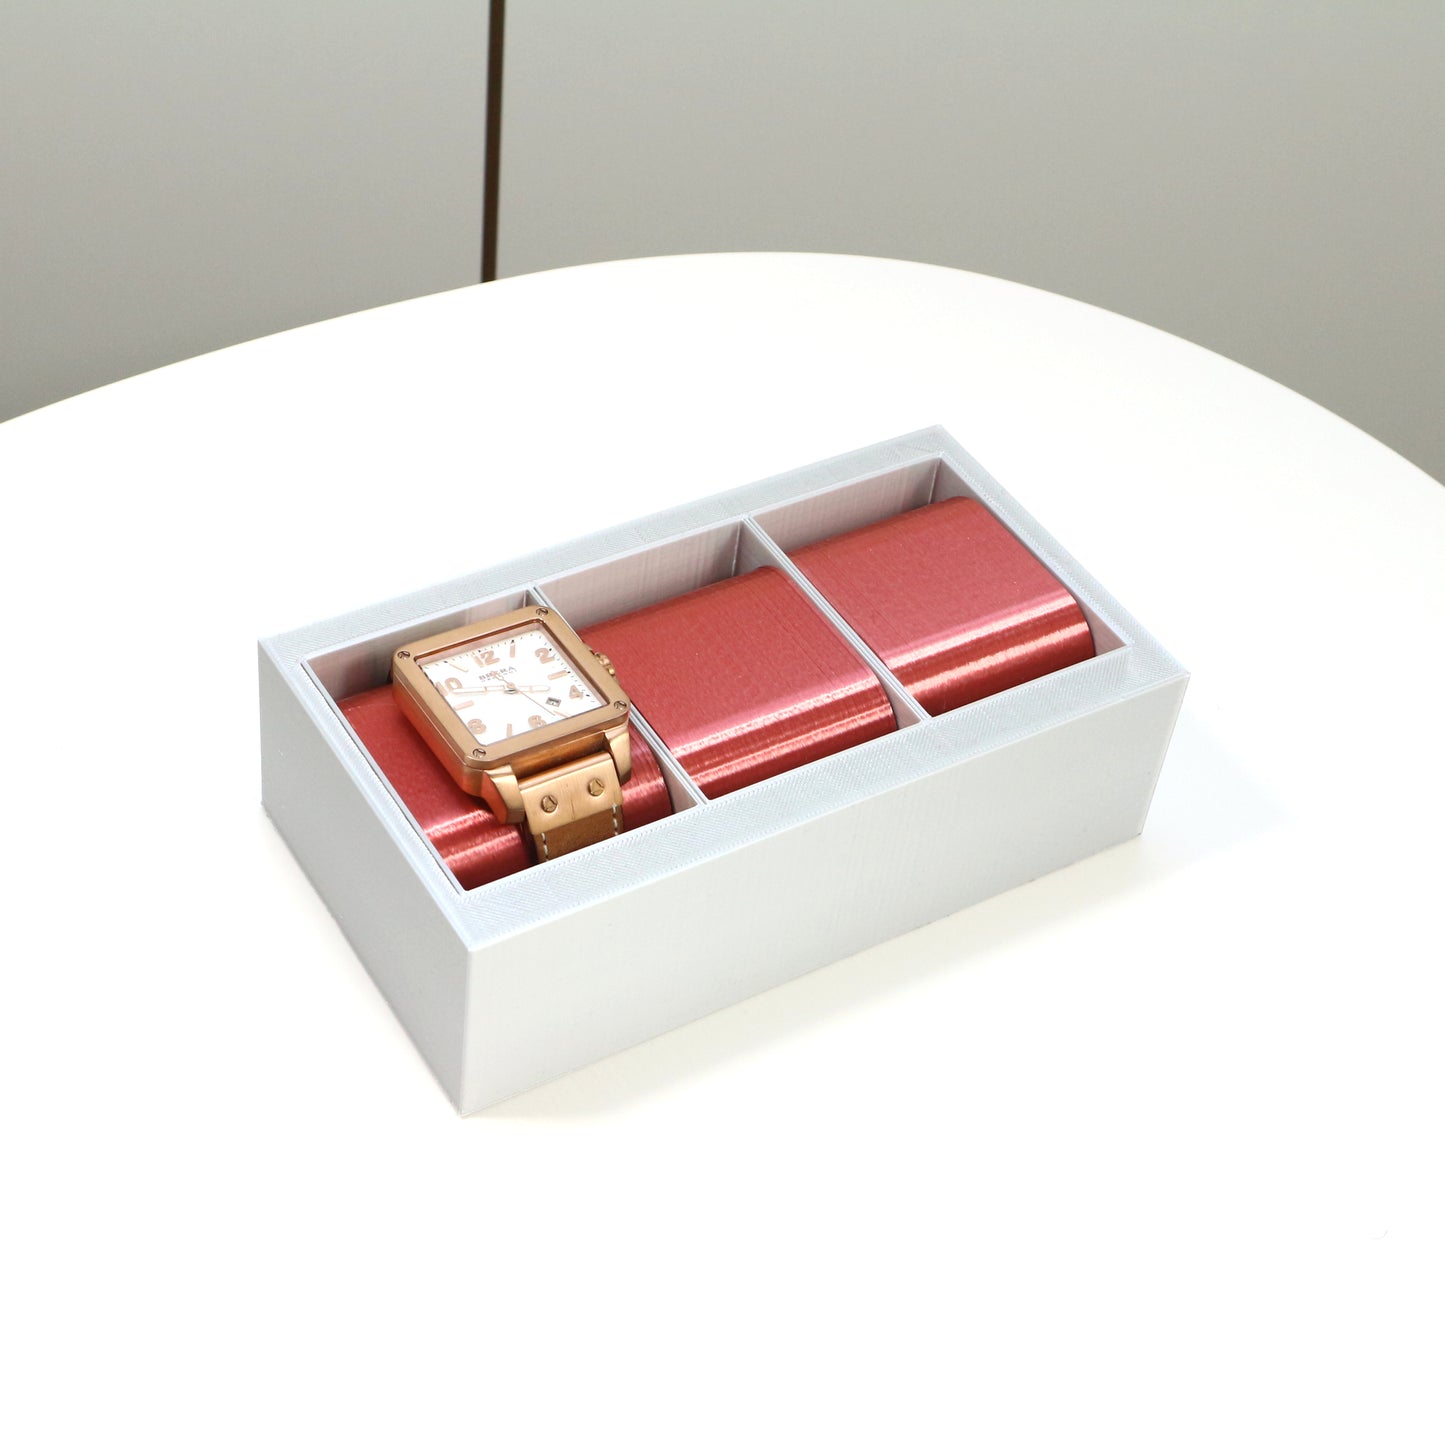 Imperiale watch box